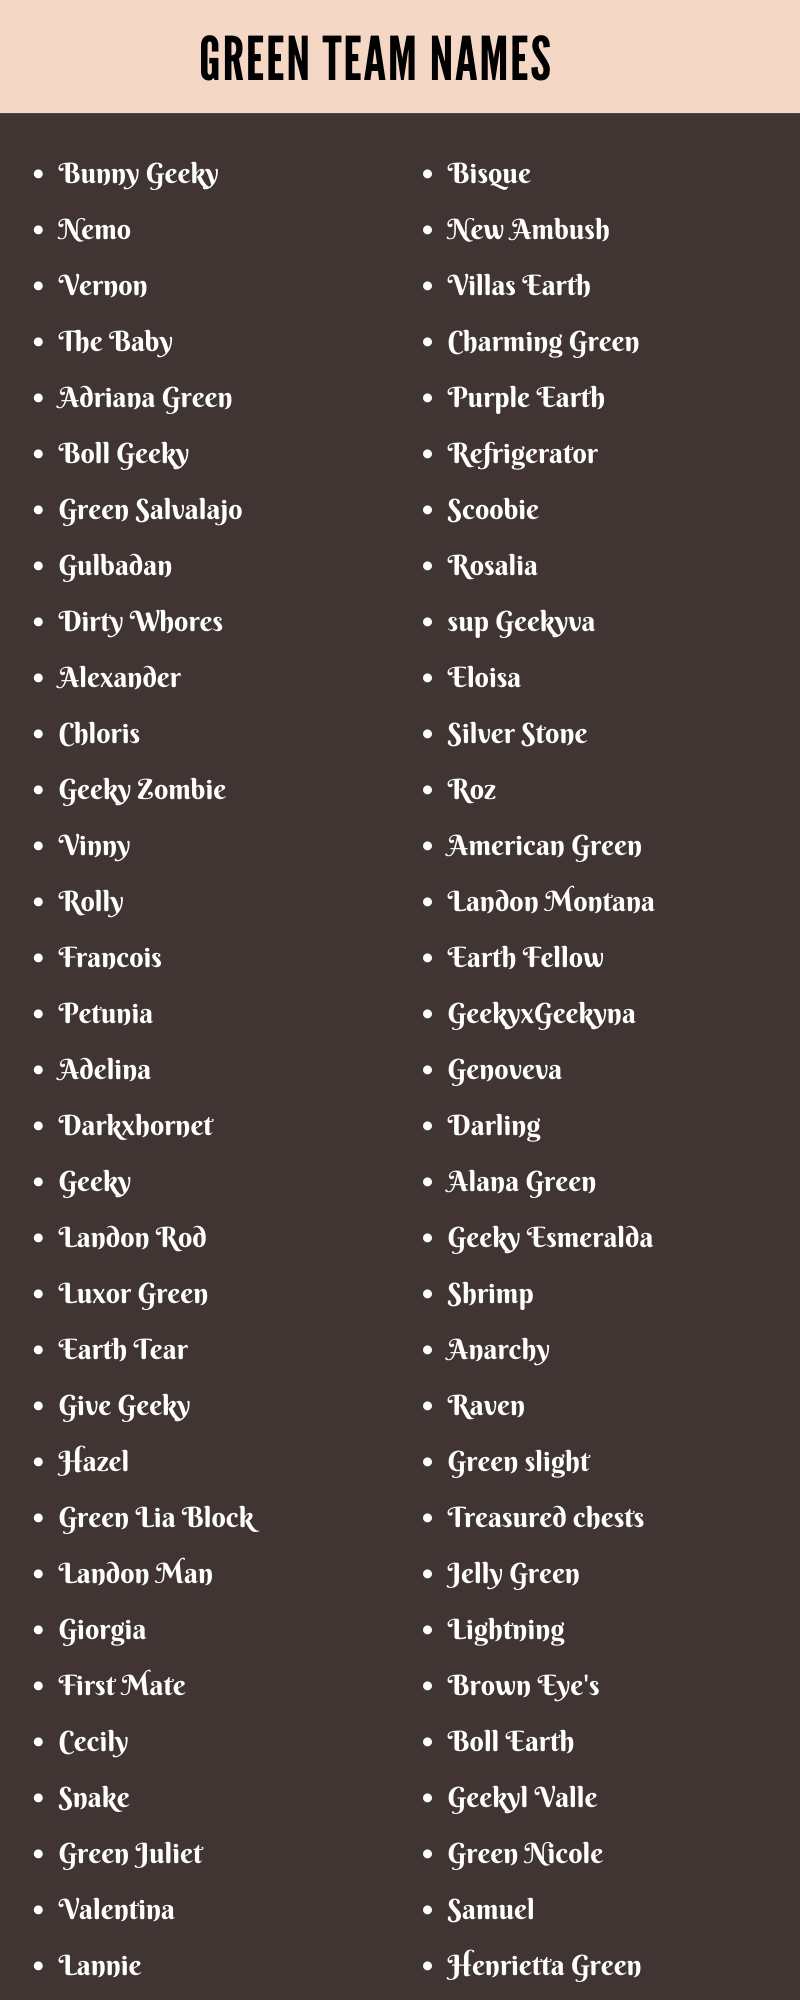 400 Cool Green Team Names Ideas and Suggestions